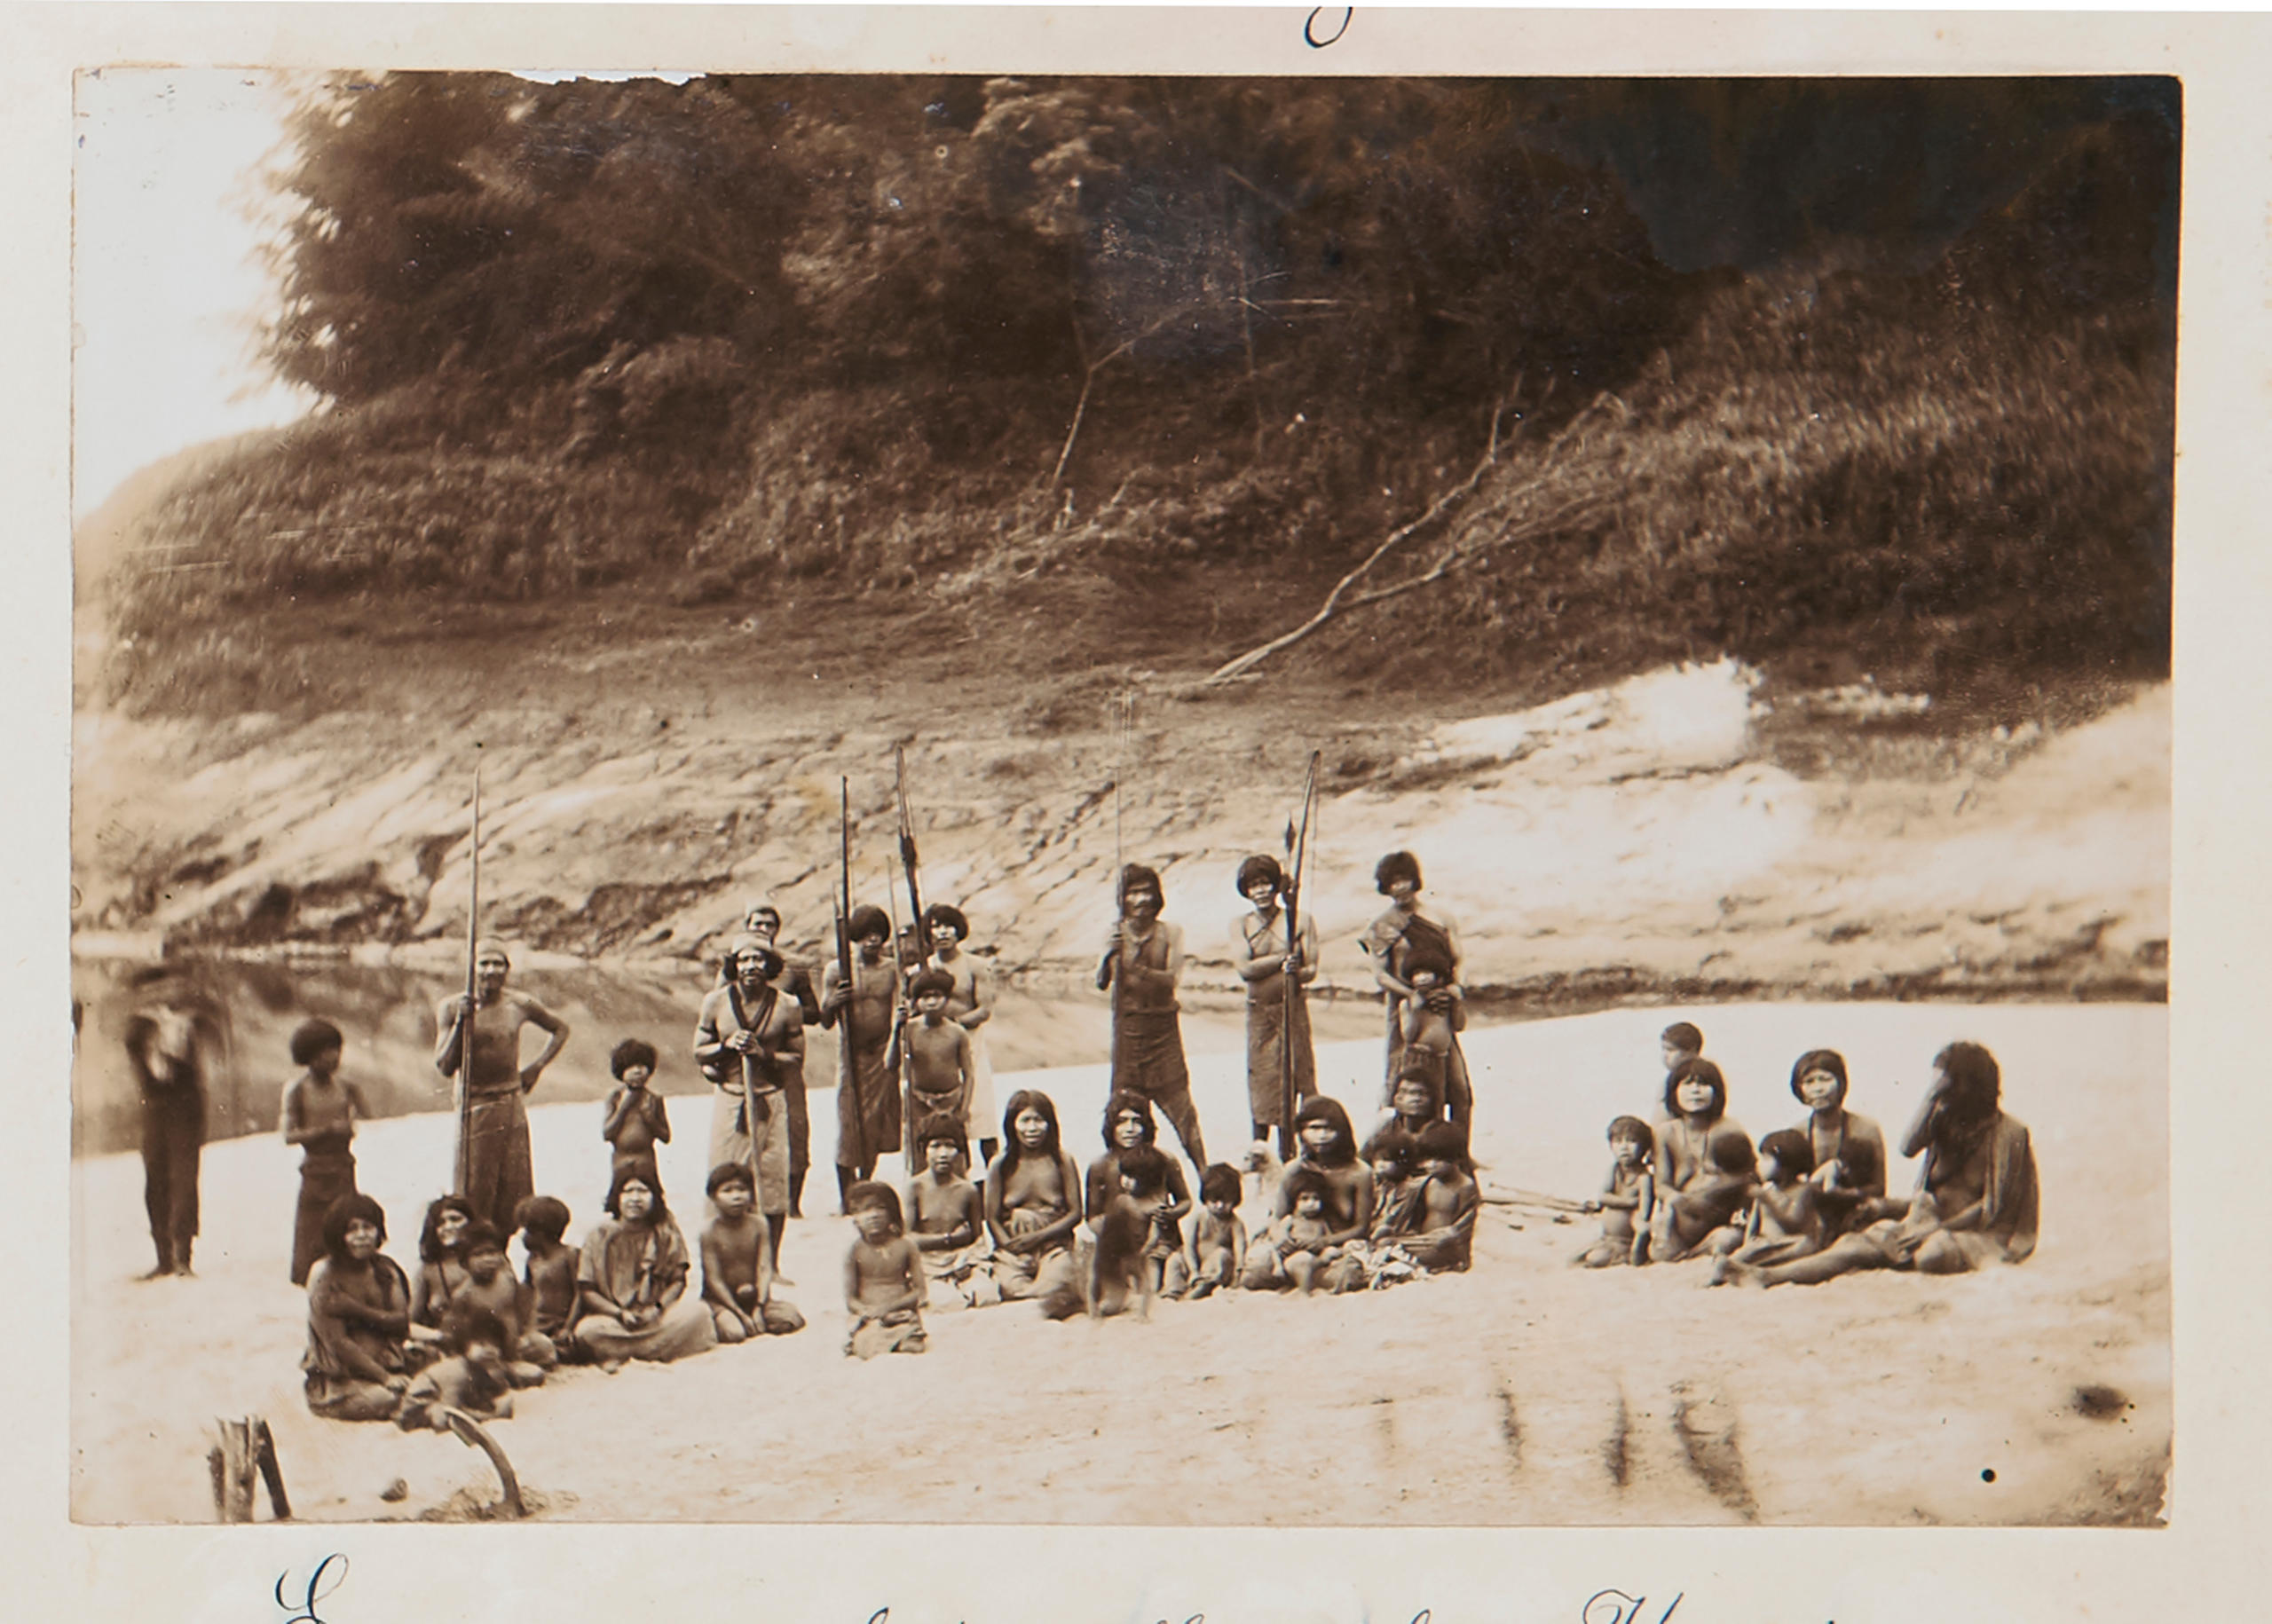 An old sepia photograph of a group of people standing (with spears) and sitting within the setting of a landscape.